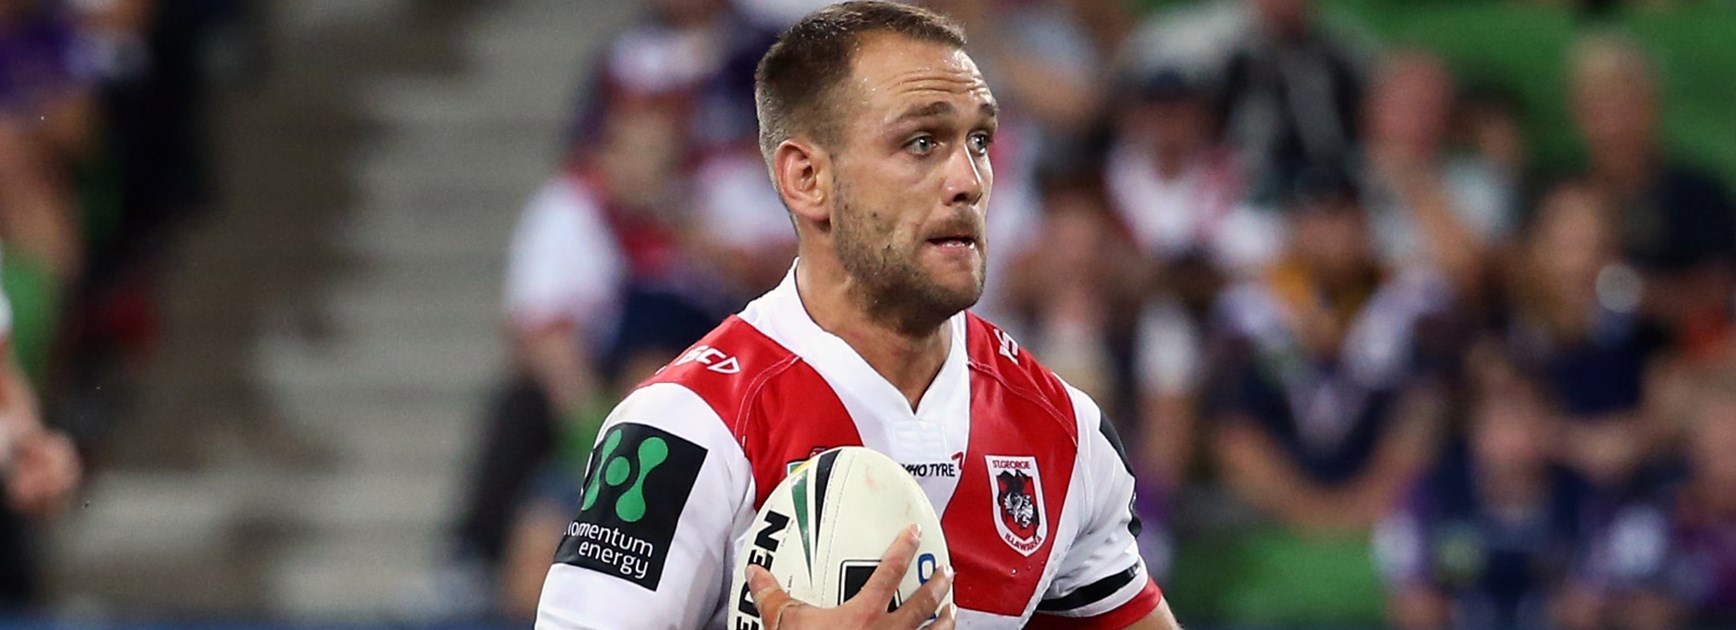 Dragons winger Jason Nightingale will line up for his 200th NRL appearance in Round 3.